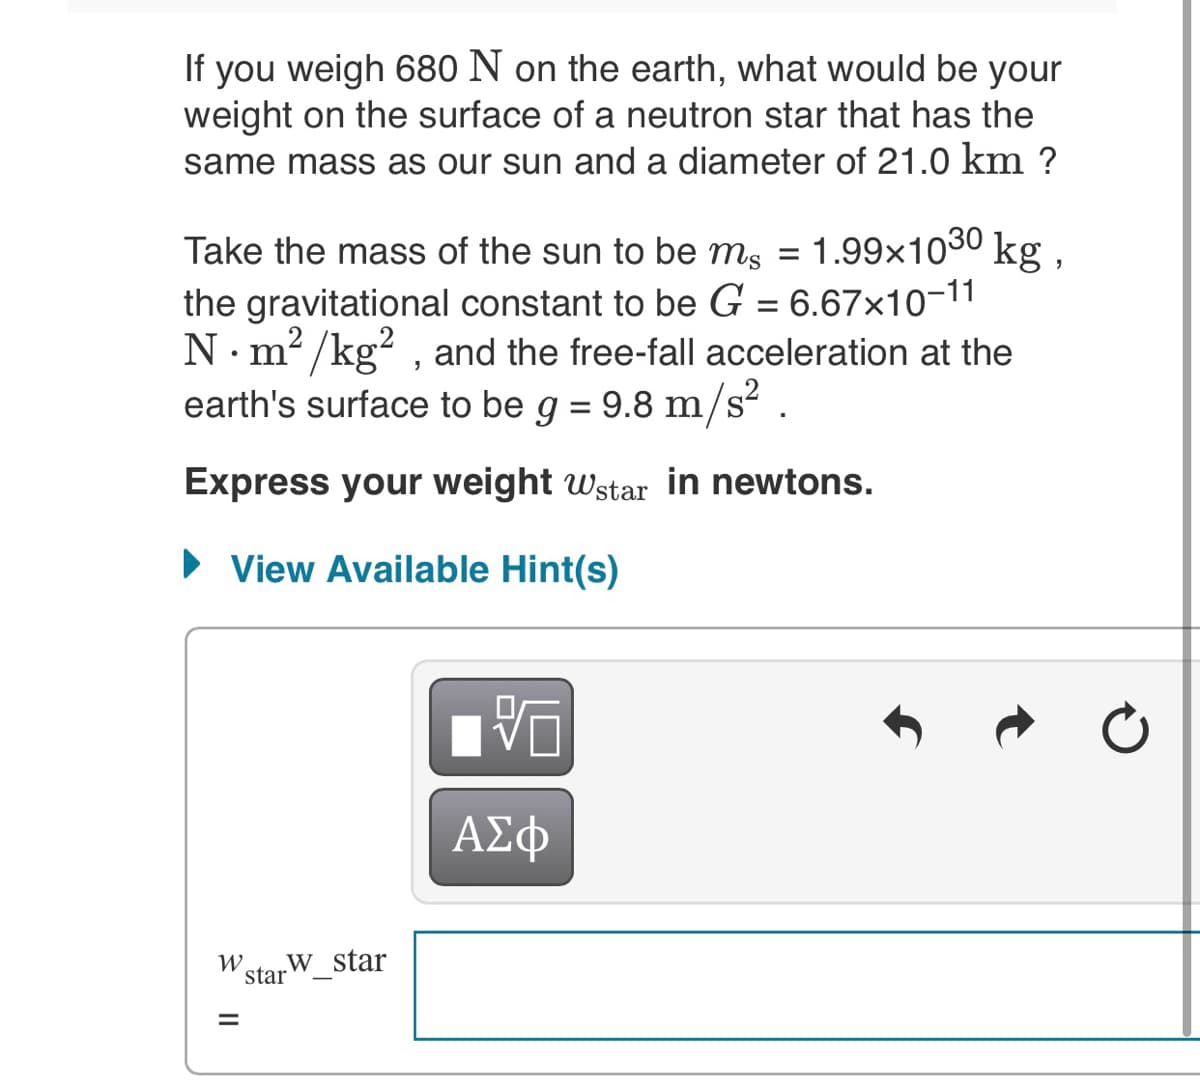 If you weigh 680 N on the earth, what would be your
weight on the surface of a neutron star that has the
same mass as our sun and a diameter of 21.0 km ?
Take the mass of the sun to be ms =
1.99x1030 kg,
the gravitational constant to be G = 6.67×10-11
N. m² /kg? , and the free-fall acceleration at the
earth's surface to be g = 9.8 m/s? .
Express your weight wstar in newtons.
• View Available Hint(s)
ΑΣφ
W.
star
„w star
